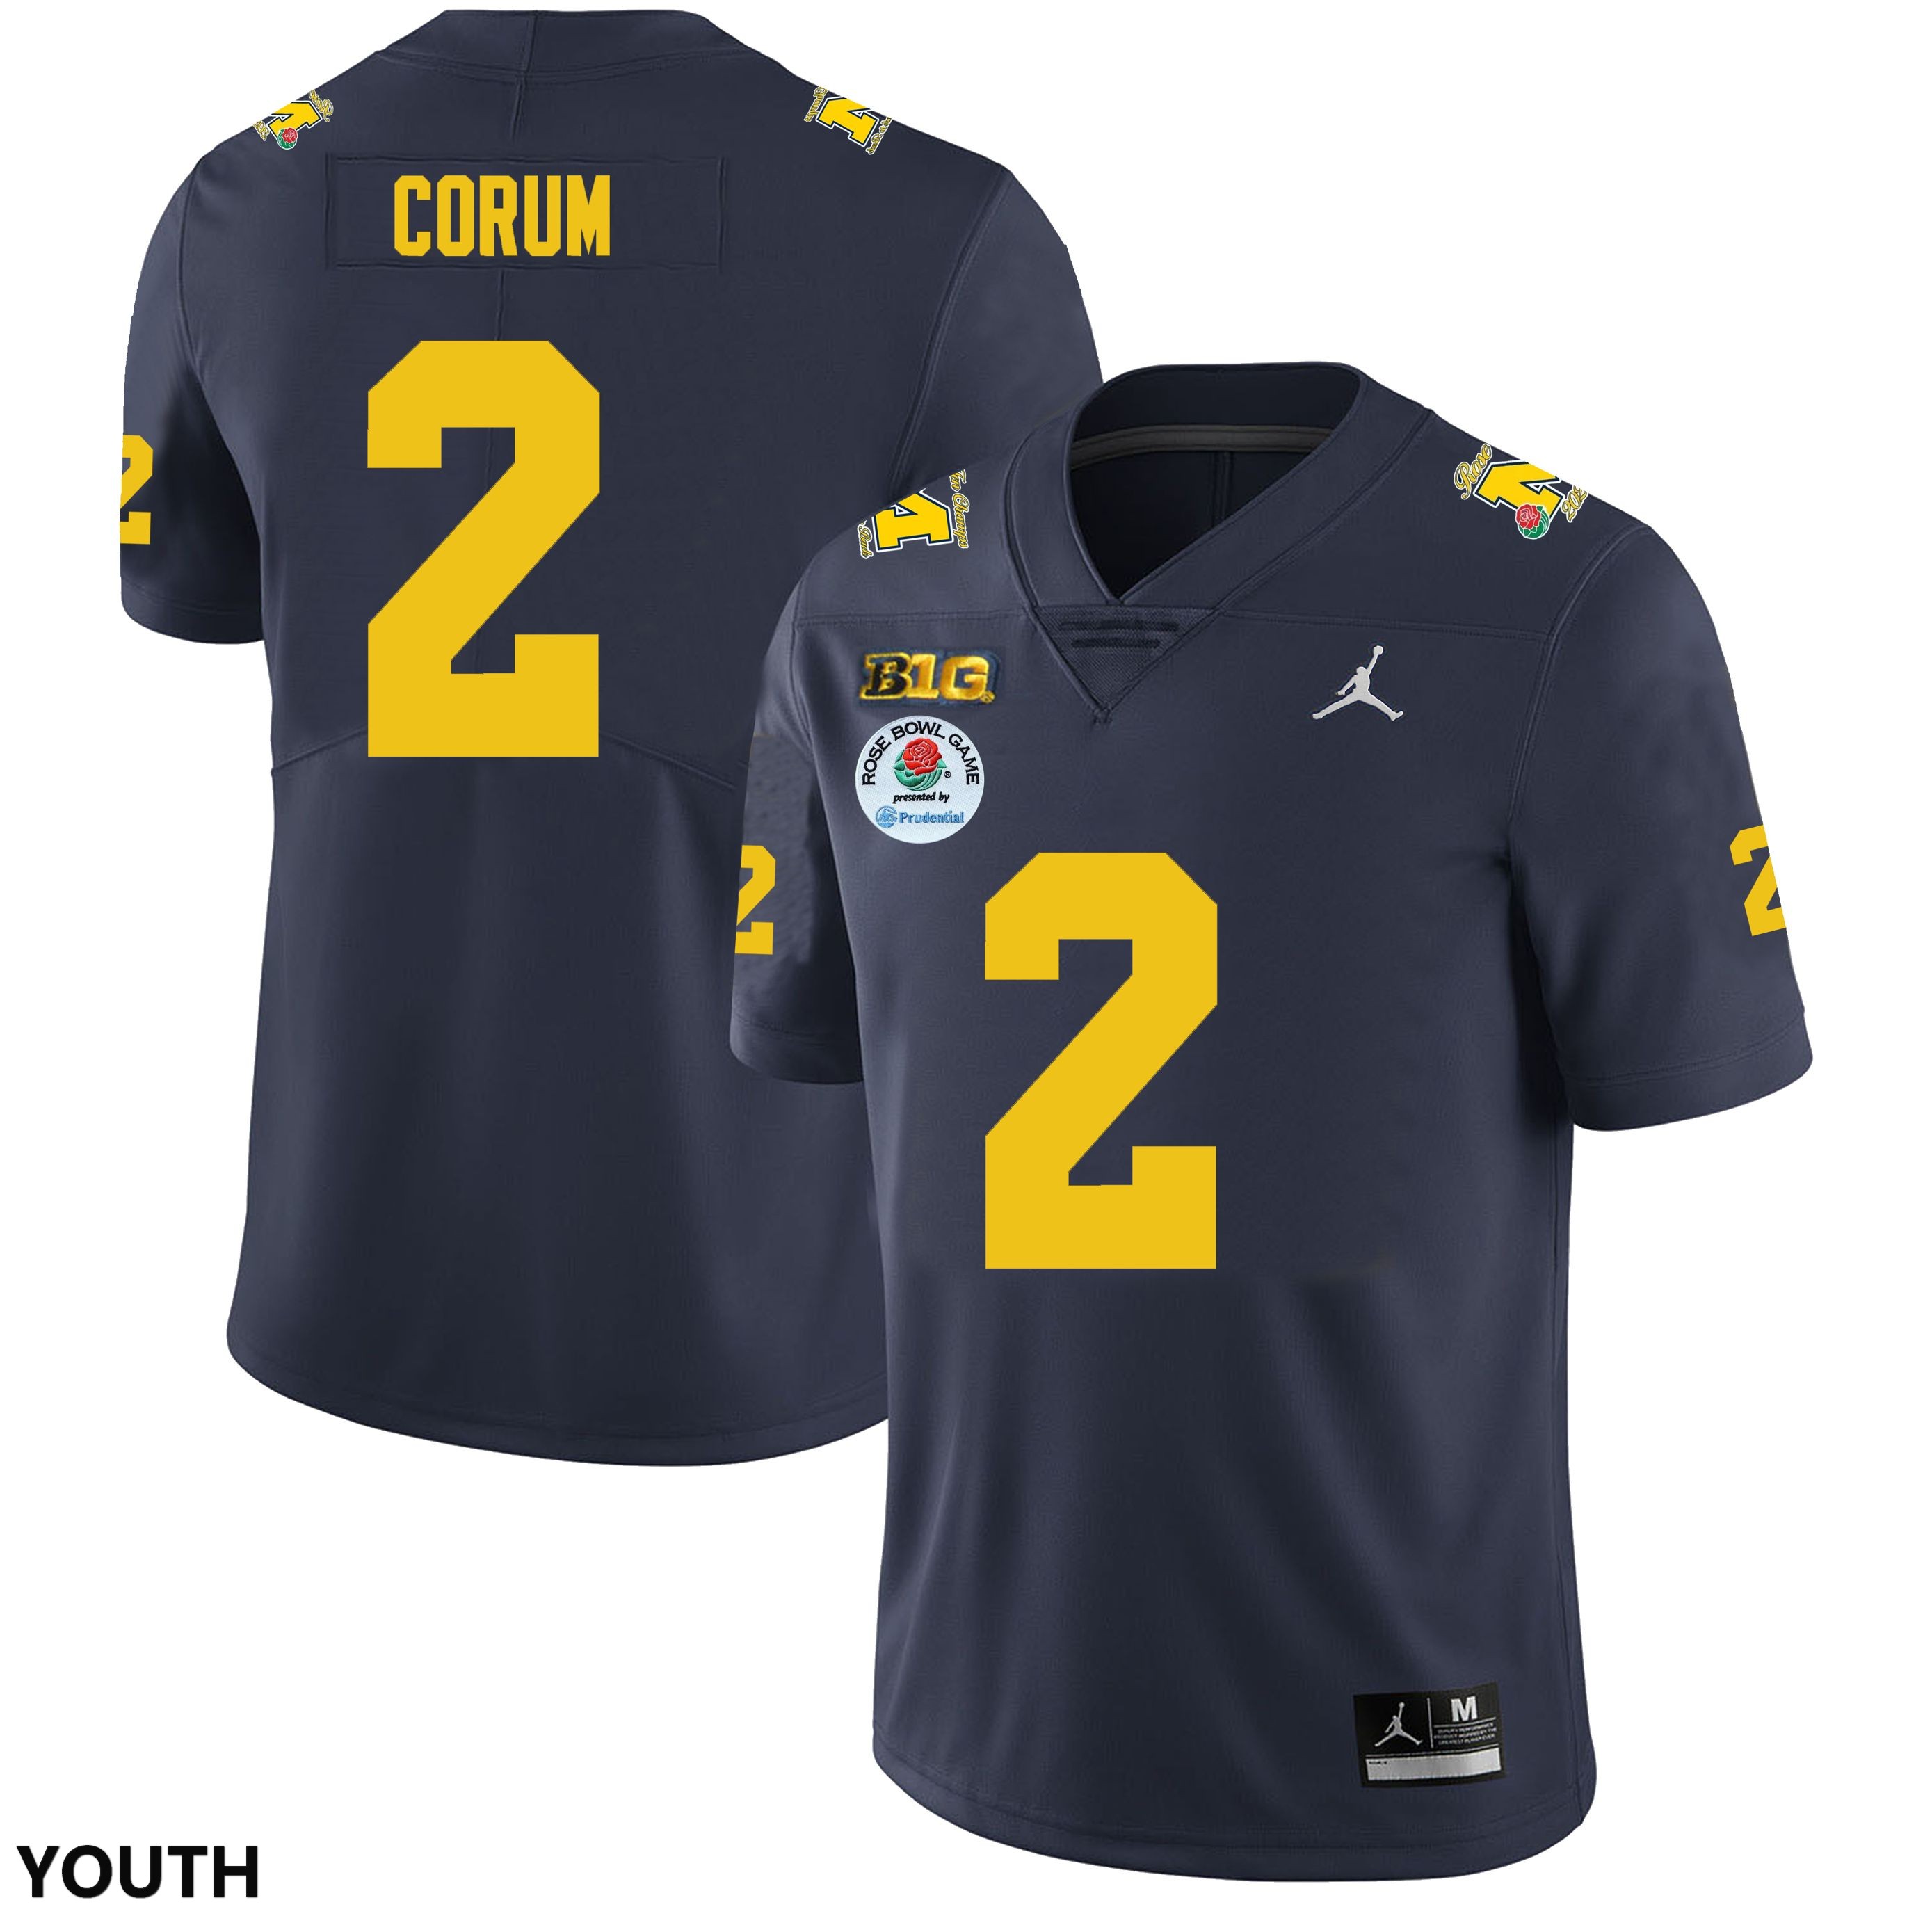 Youth NCAA Michigan Wolverines Blake Corum #2 Navy Rose Bowl Game Stitched College Football Jersey LL254G4JD